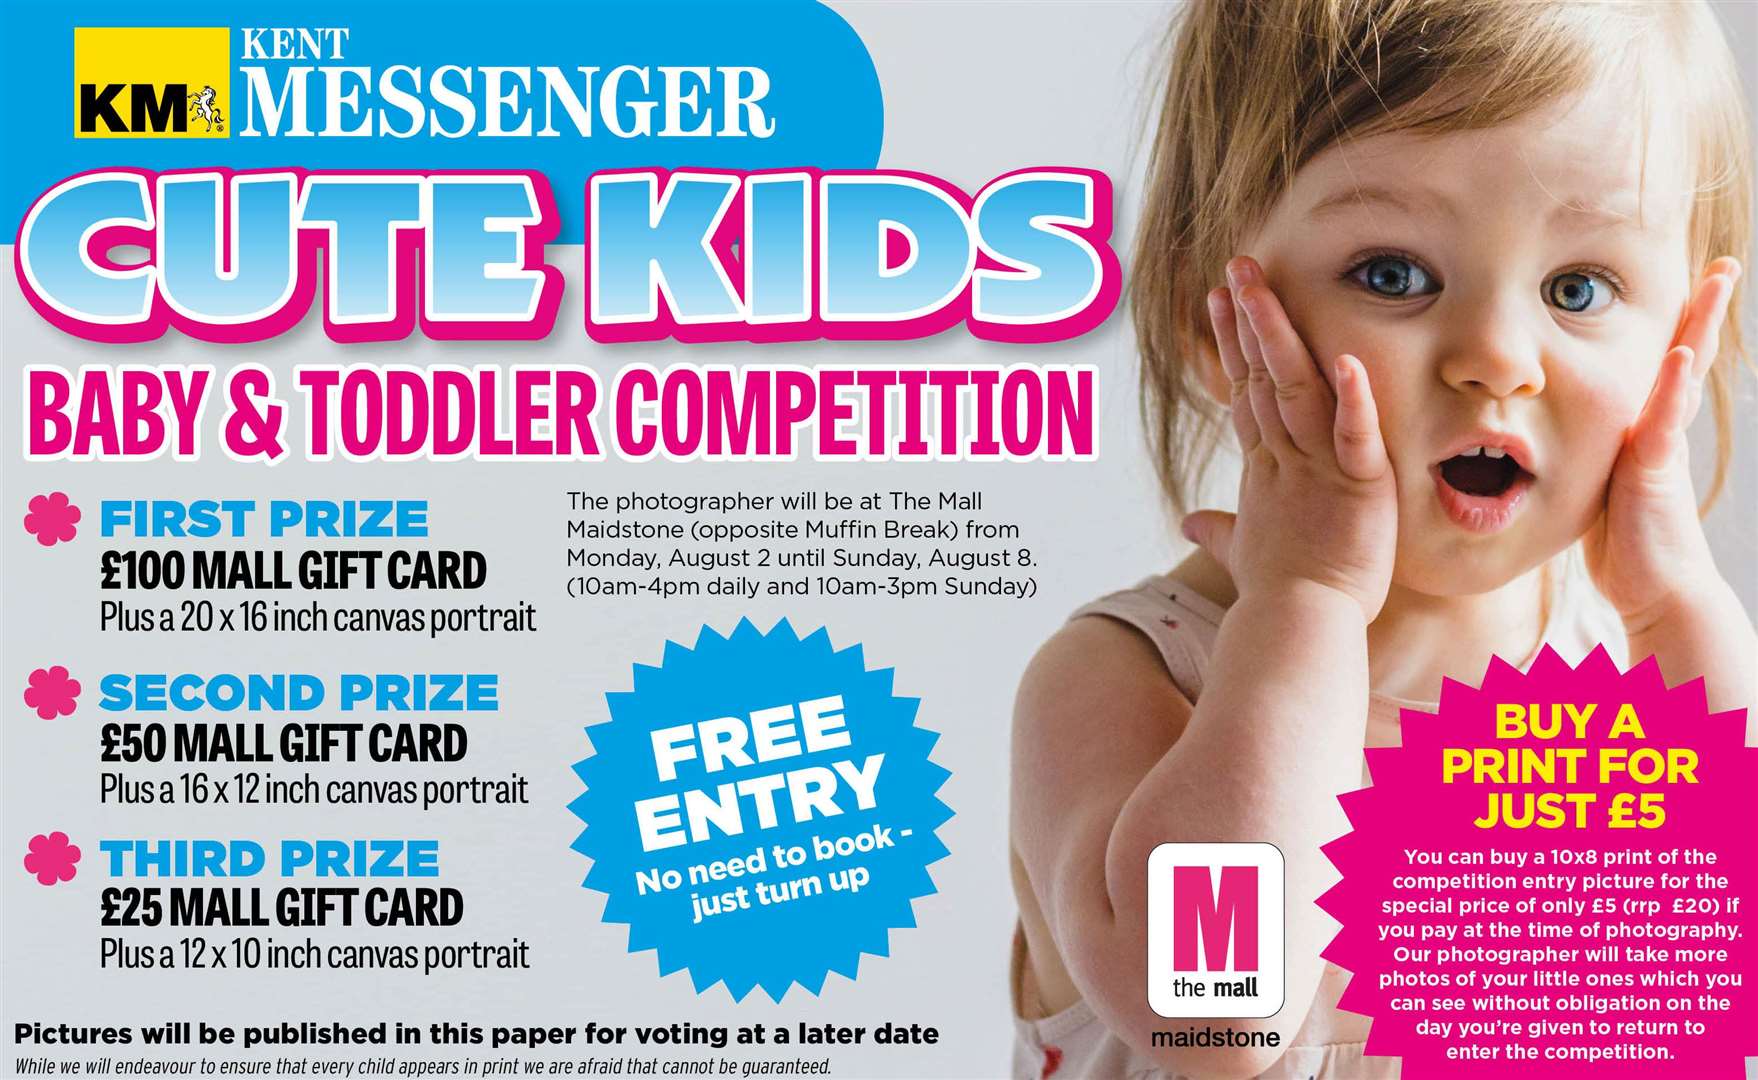 The KM's Cute Kids Competition is back for 2021